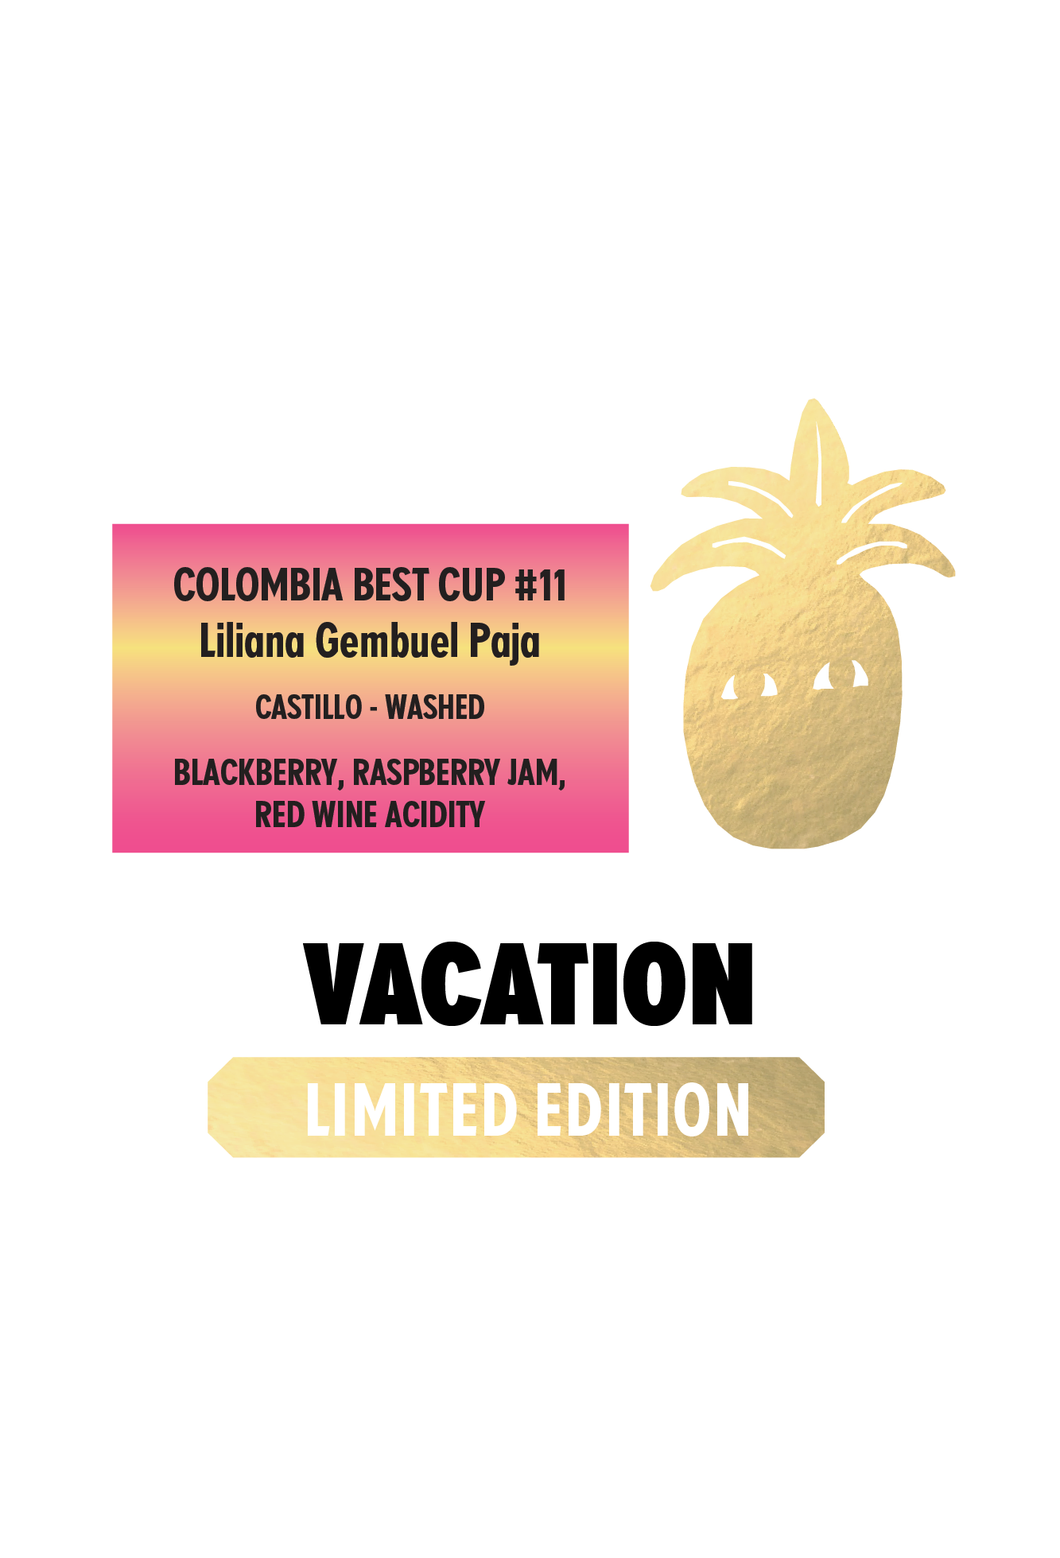 COLOMBIA Best Cup #11 Liliana Gembuel Paja | LIMITED EDITION